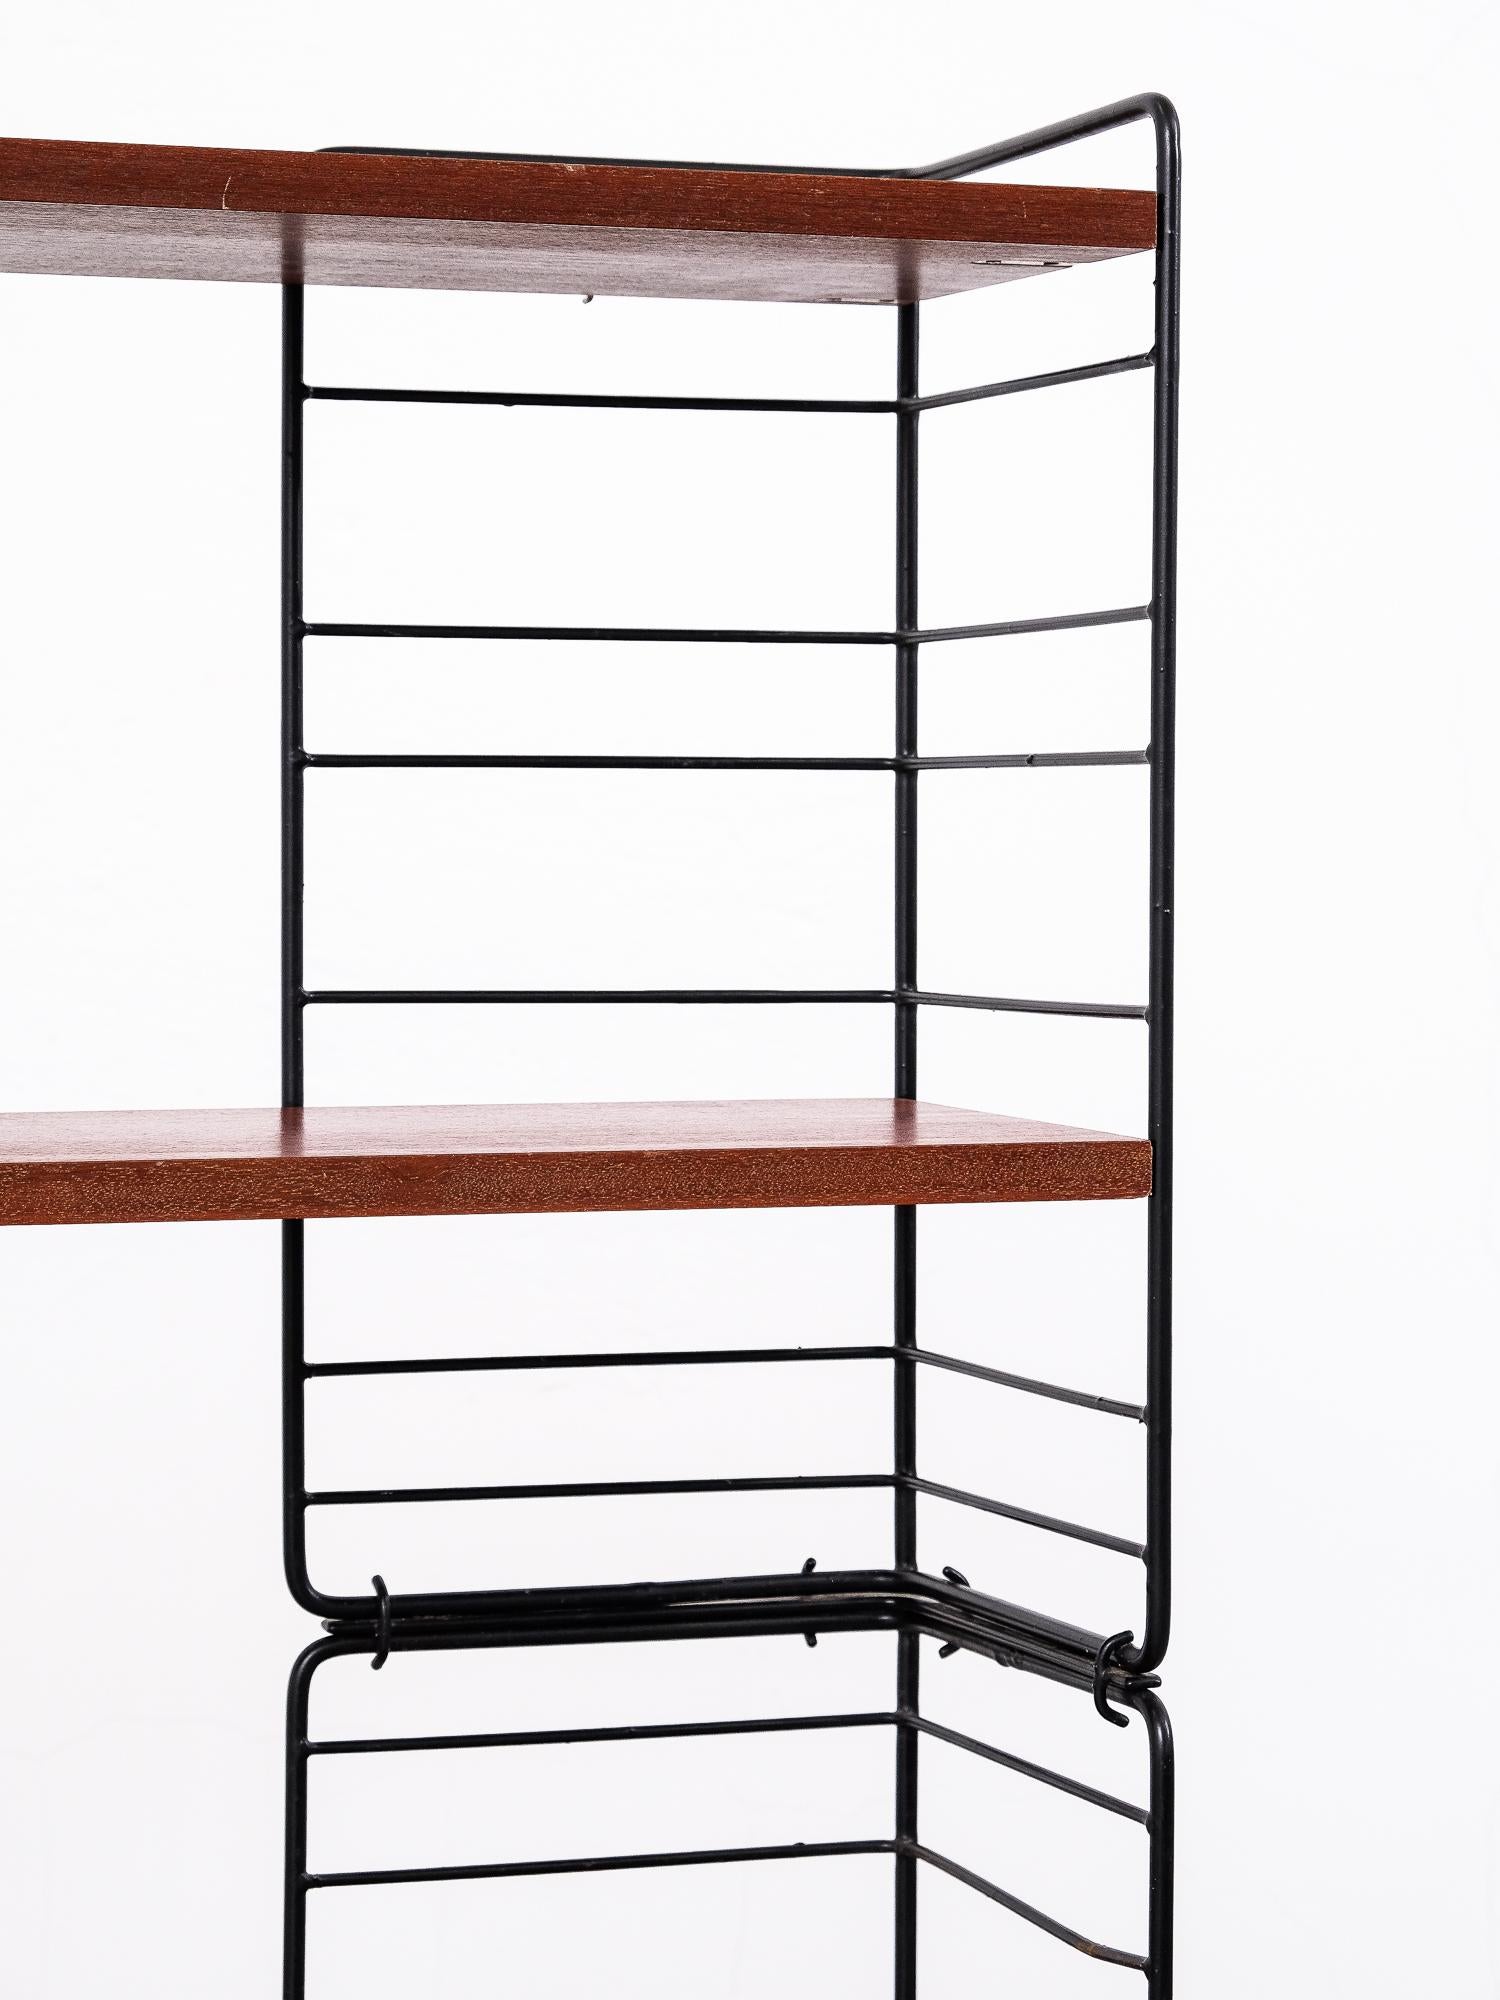 Mid-20th Century Freestanding String Shelving System by Nisse Strinning, 1960s